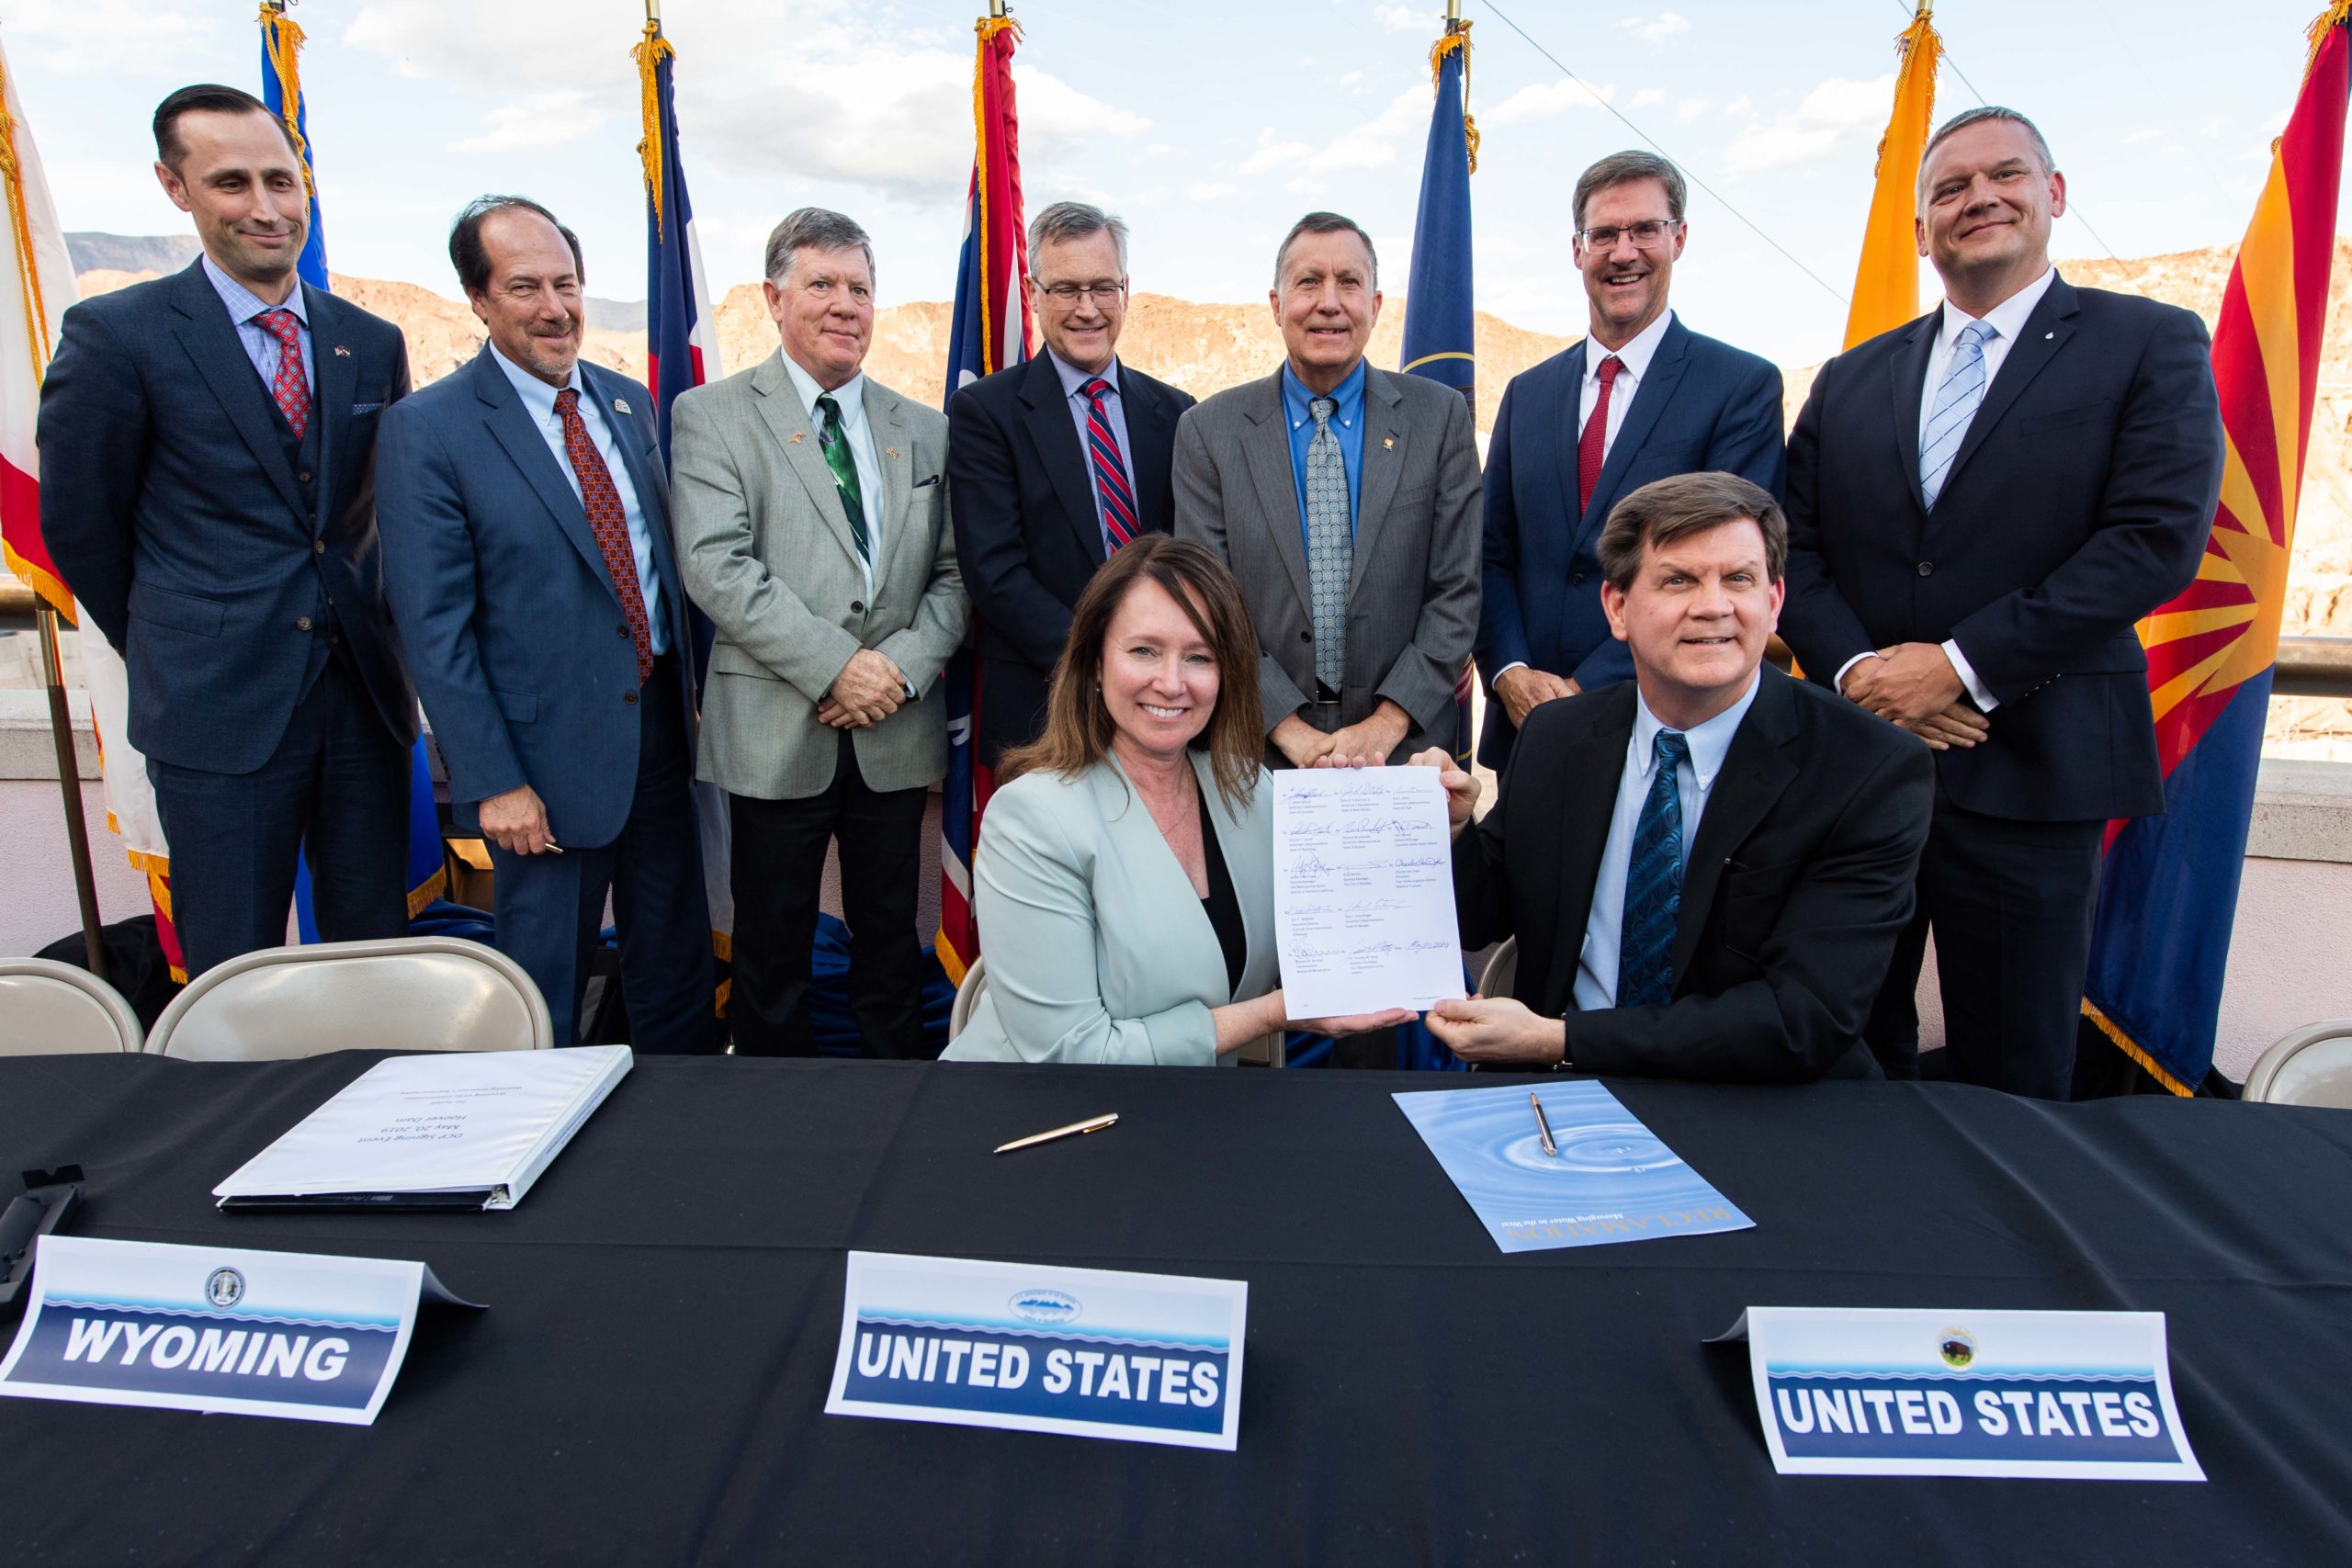 In May 2019, Colorado joined six other western states and the U.S. Bureau of Reclamation to sign a Drought Contingency Plan to find temporary solutions to the Colorado River’s supply and demand imbalance. Photo credit: U.S. Bureau of Reclamation, May 20, 2019.